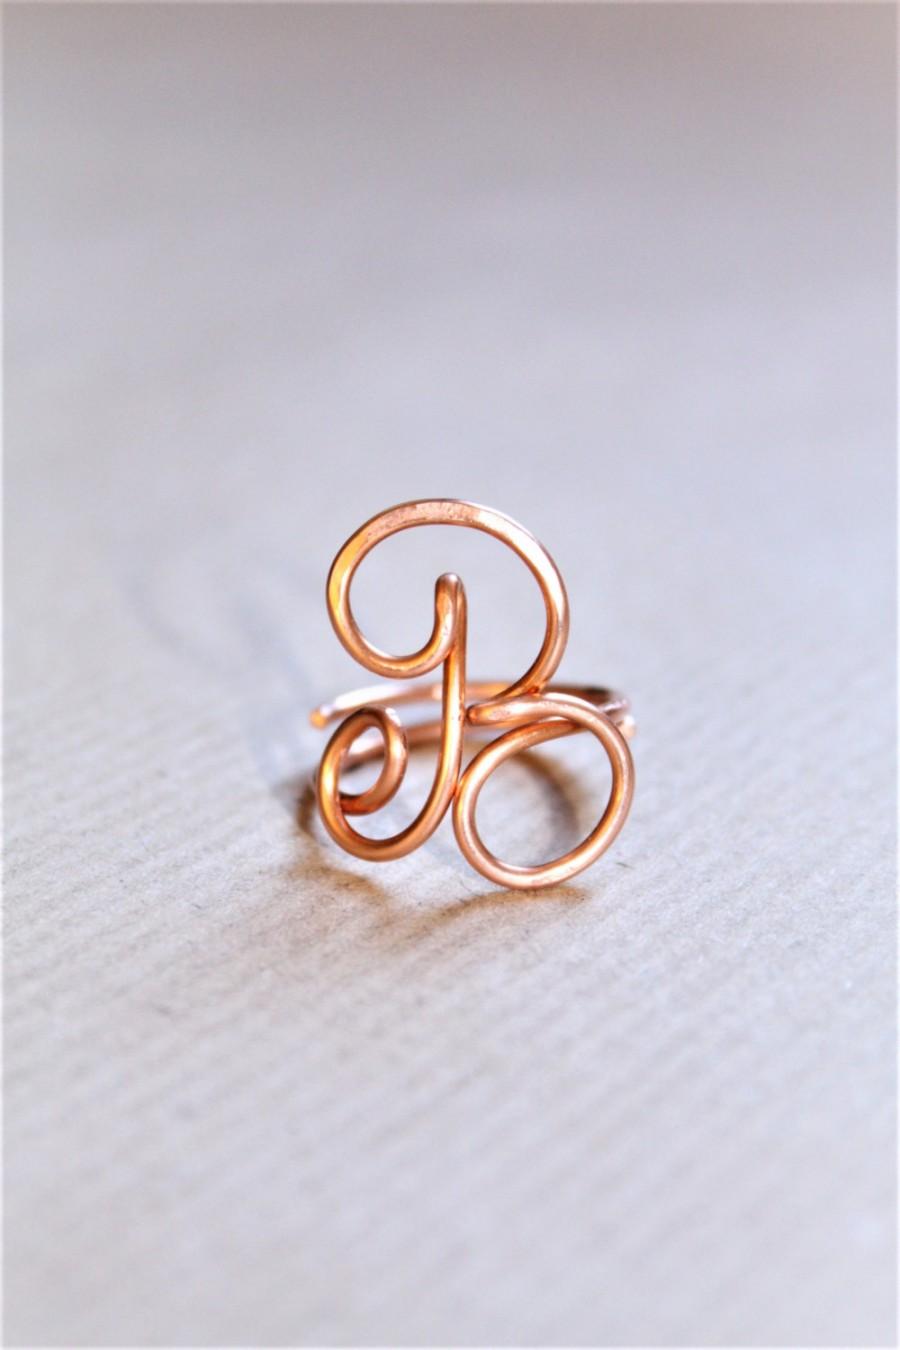 Mariage - Initial ring, letter A B F ring, personalized wire initial ring, wire ring, personalized ring, adjustable ring, wire letters, letter ring